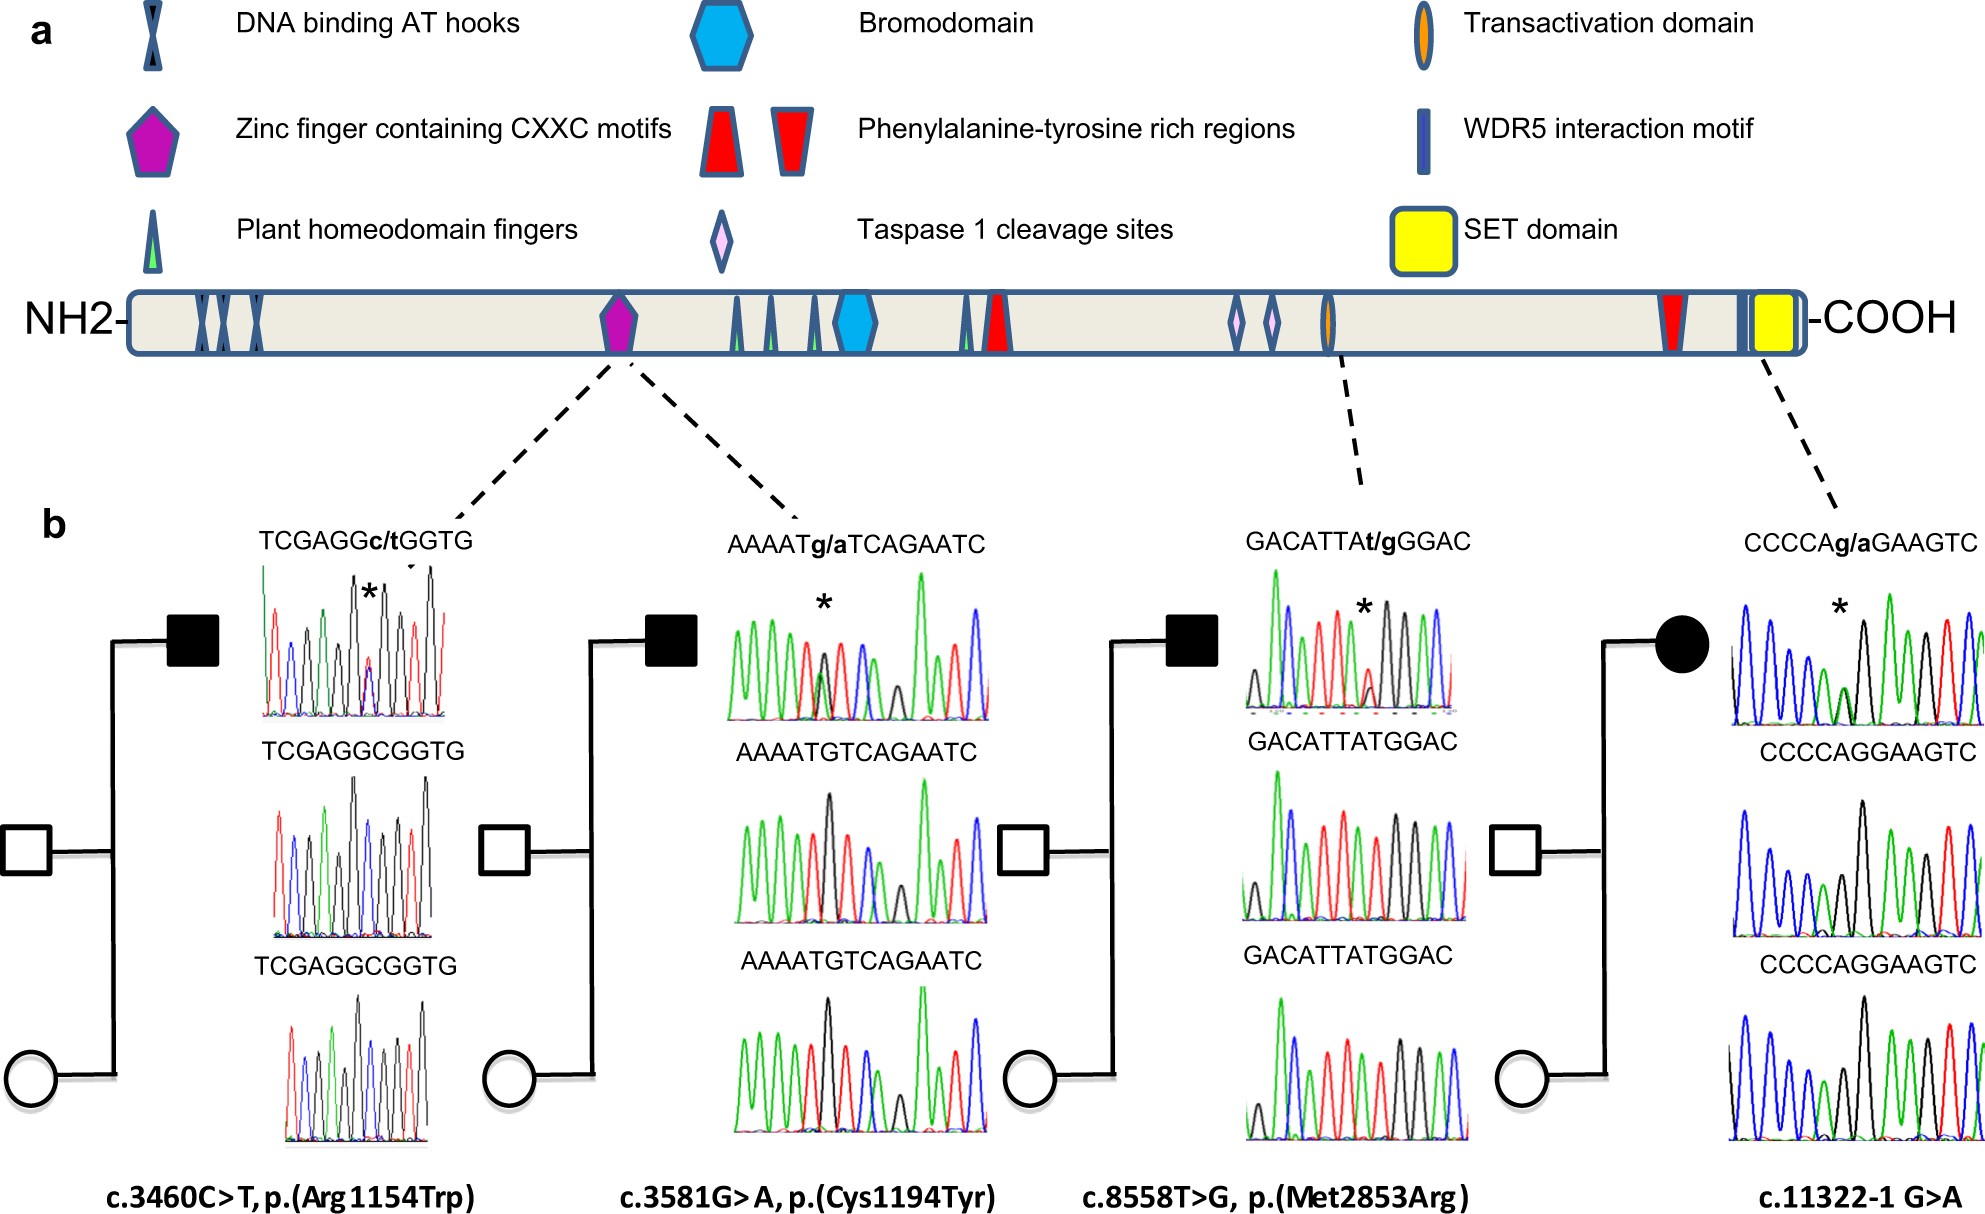 Expanding the phenotype associated to KMT2A variants: overlapping